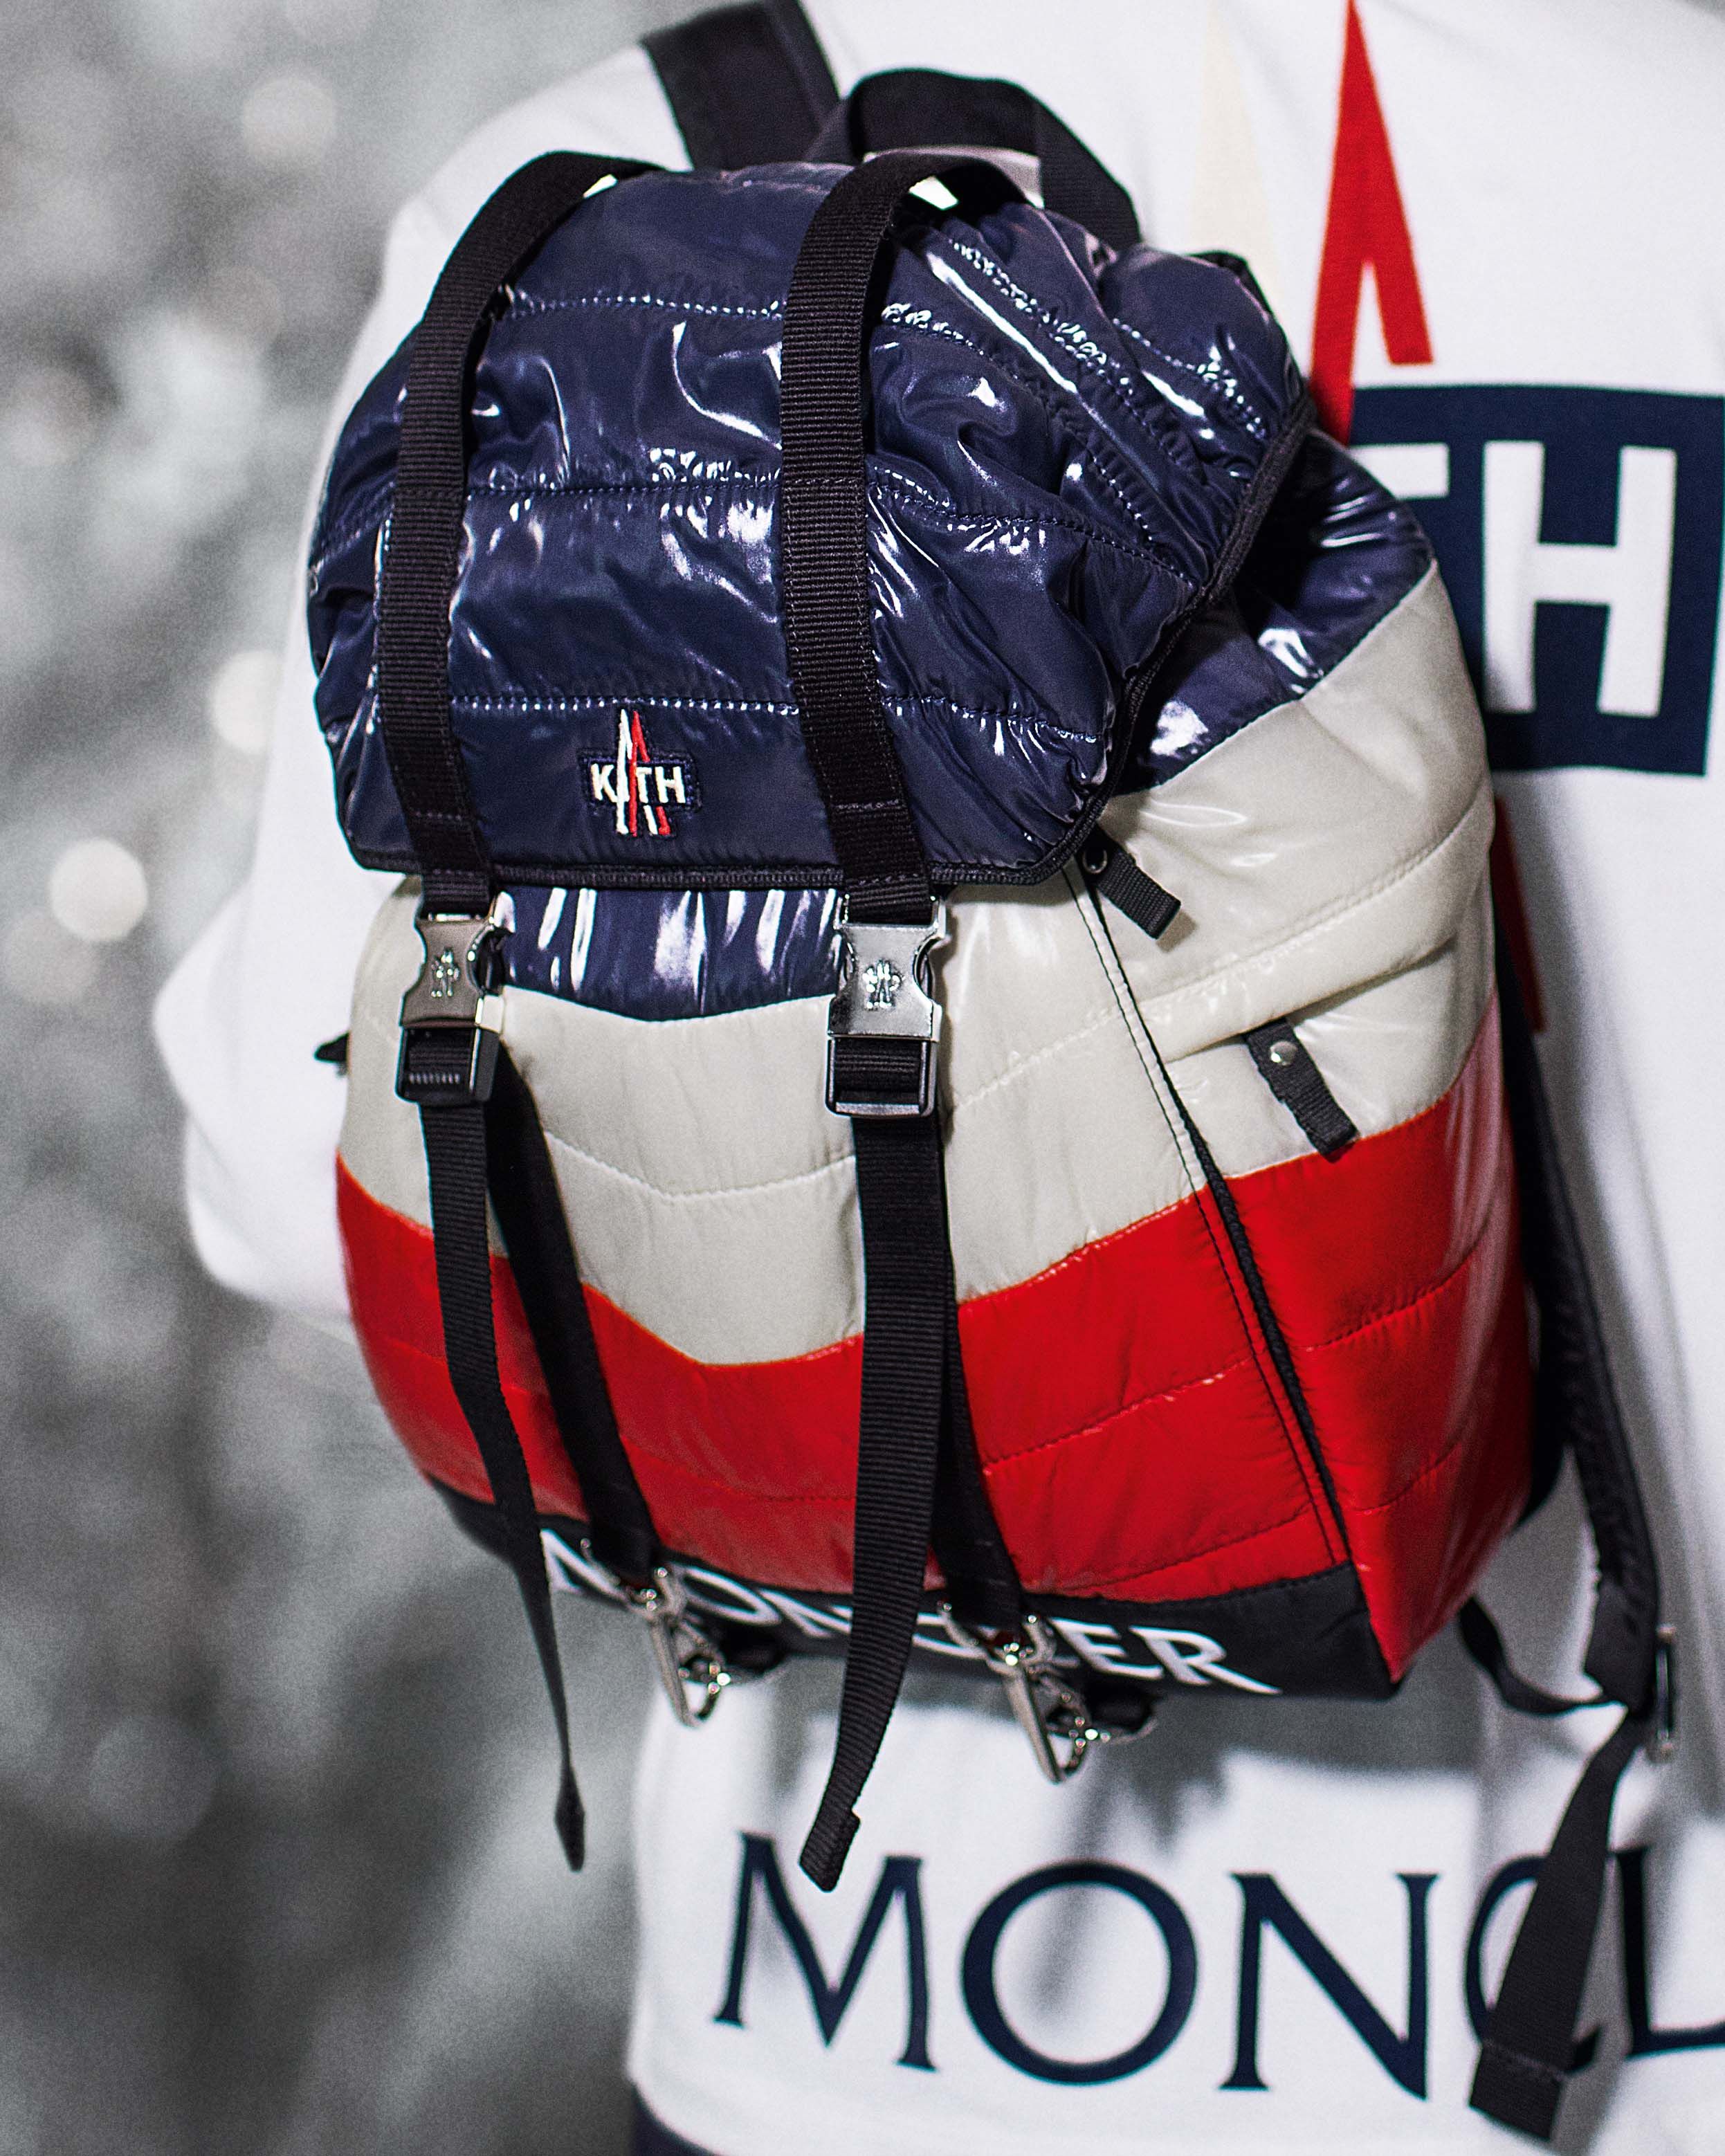 Kith x Moncler Will Make You a Super-Warm Street-Style God